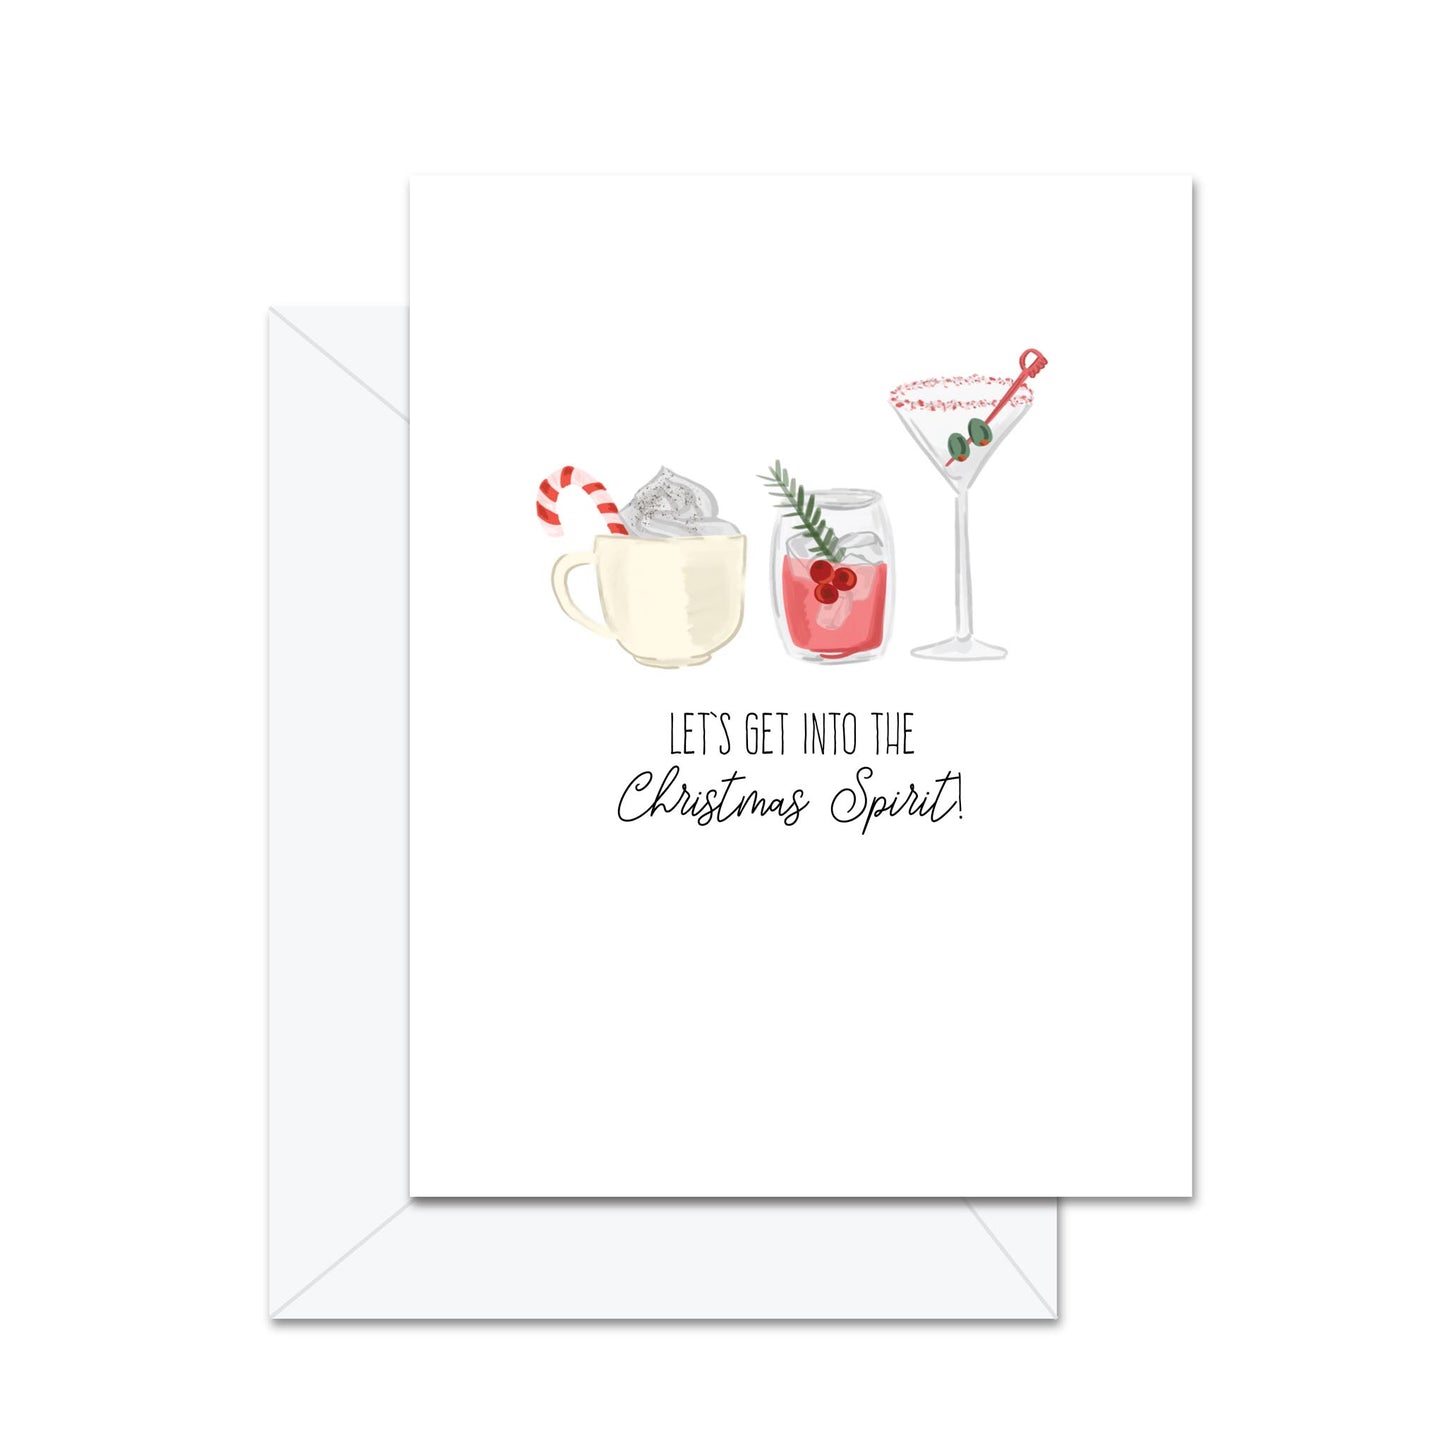 Let's Get Into The Christmas Spirit! - Greeting Card